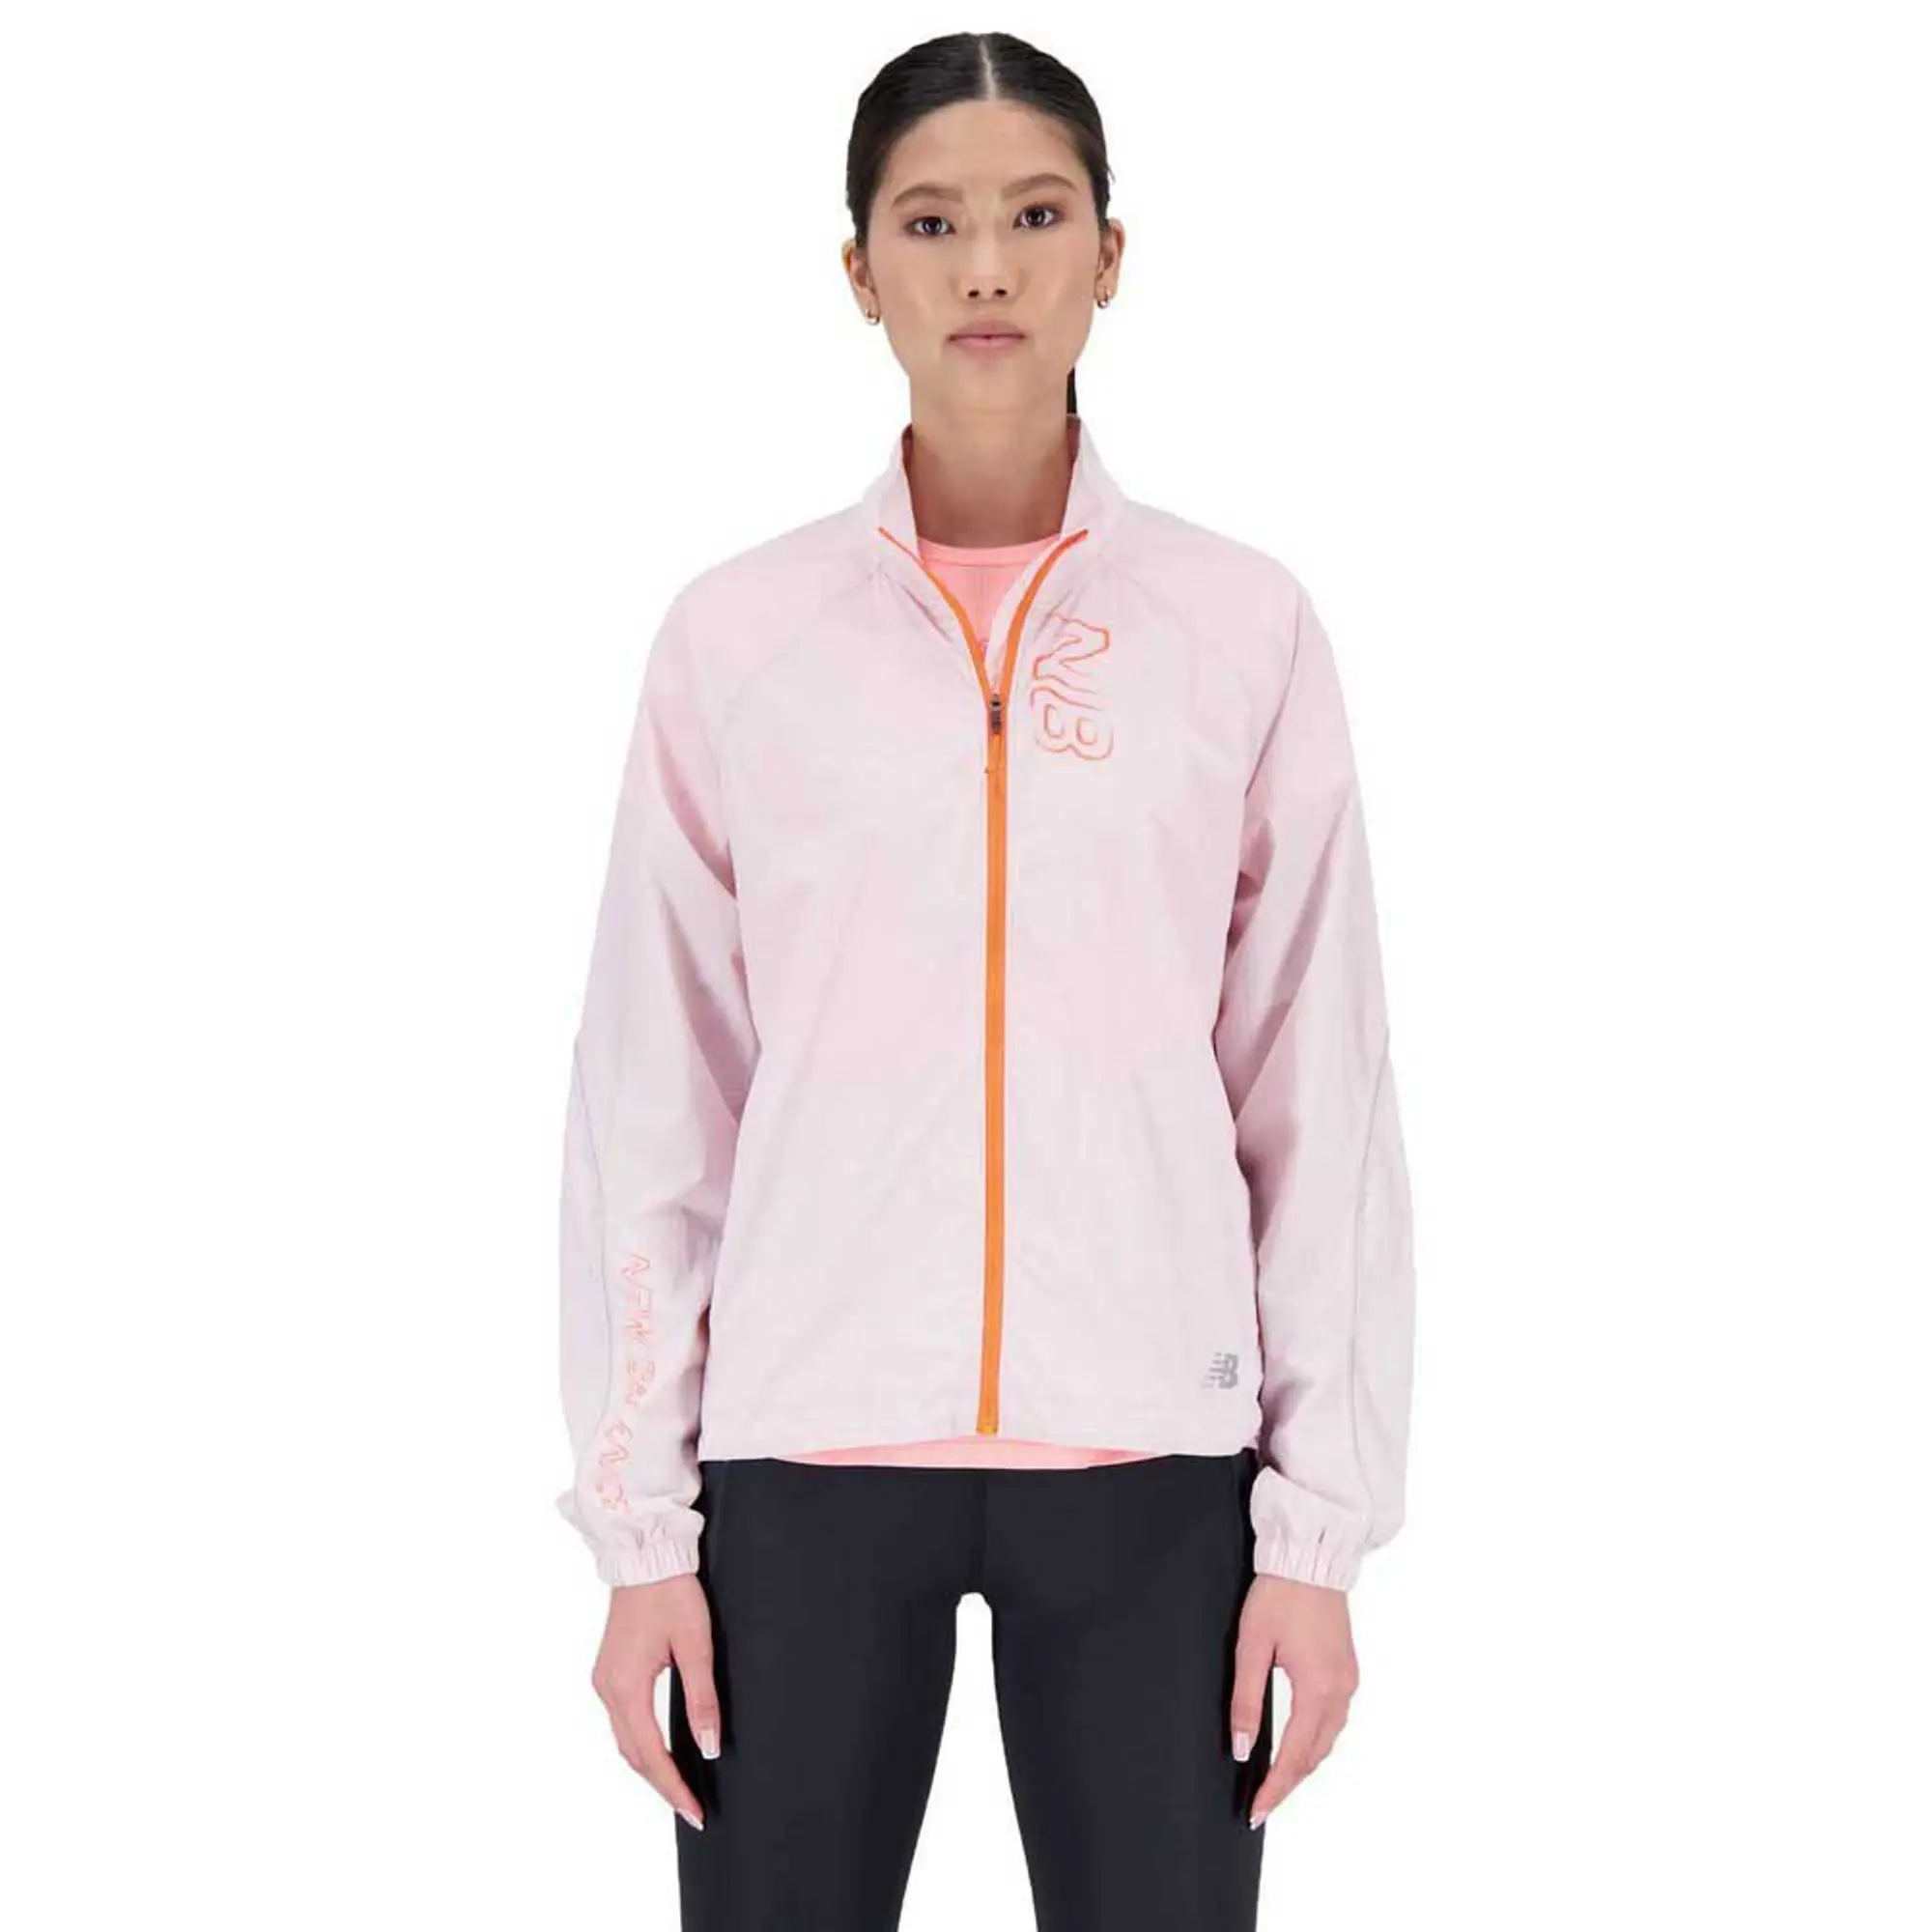 New Balance Women's Printed Impact Run Light Pack Jacket in Pink Polywoven